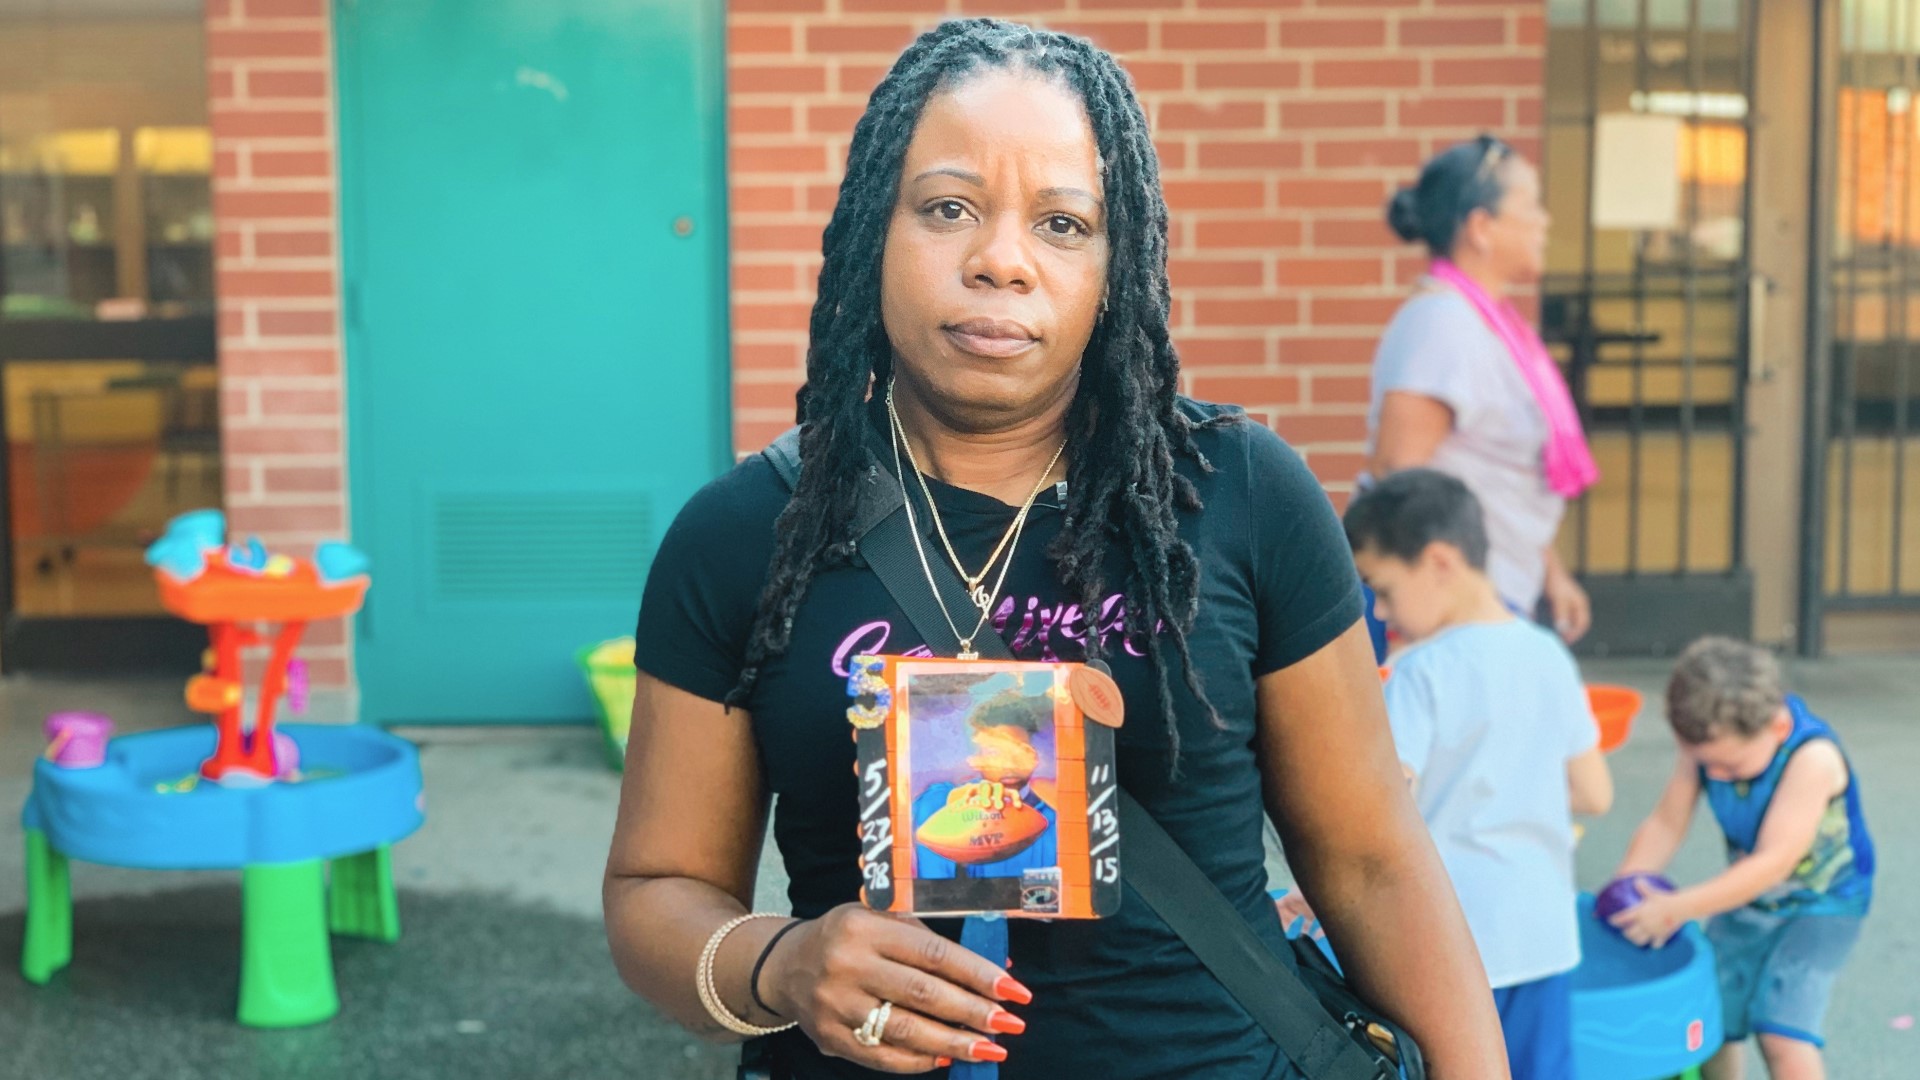 A Sacramento mother who lost her teenage son to gun violence in 2015 will take on the role of Sacramento’s Office of Violence Prevention Manager.